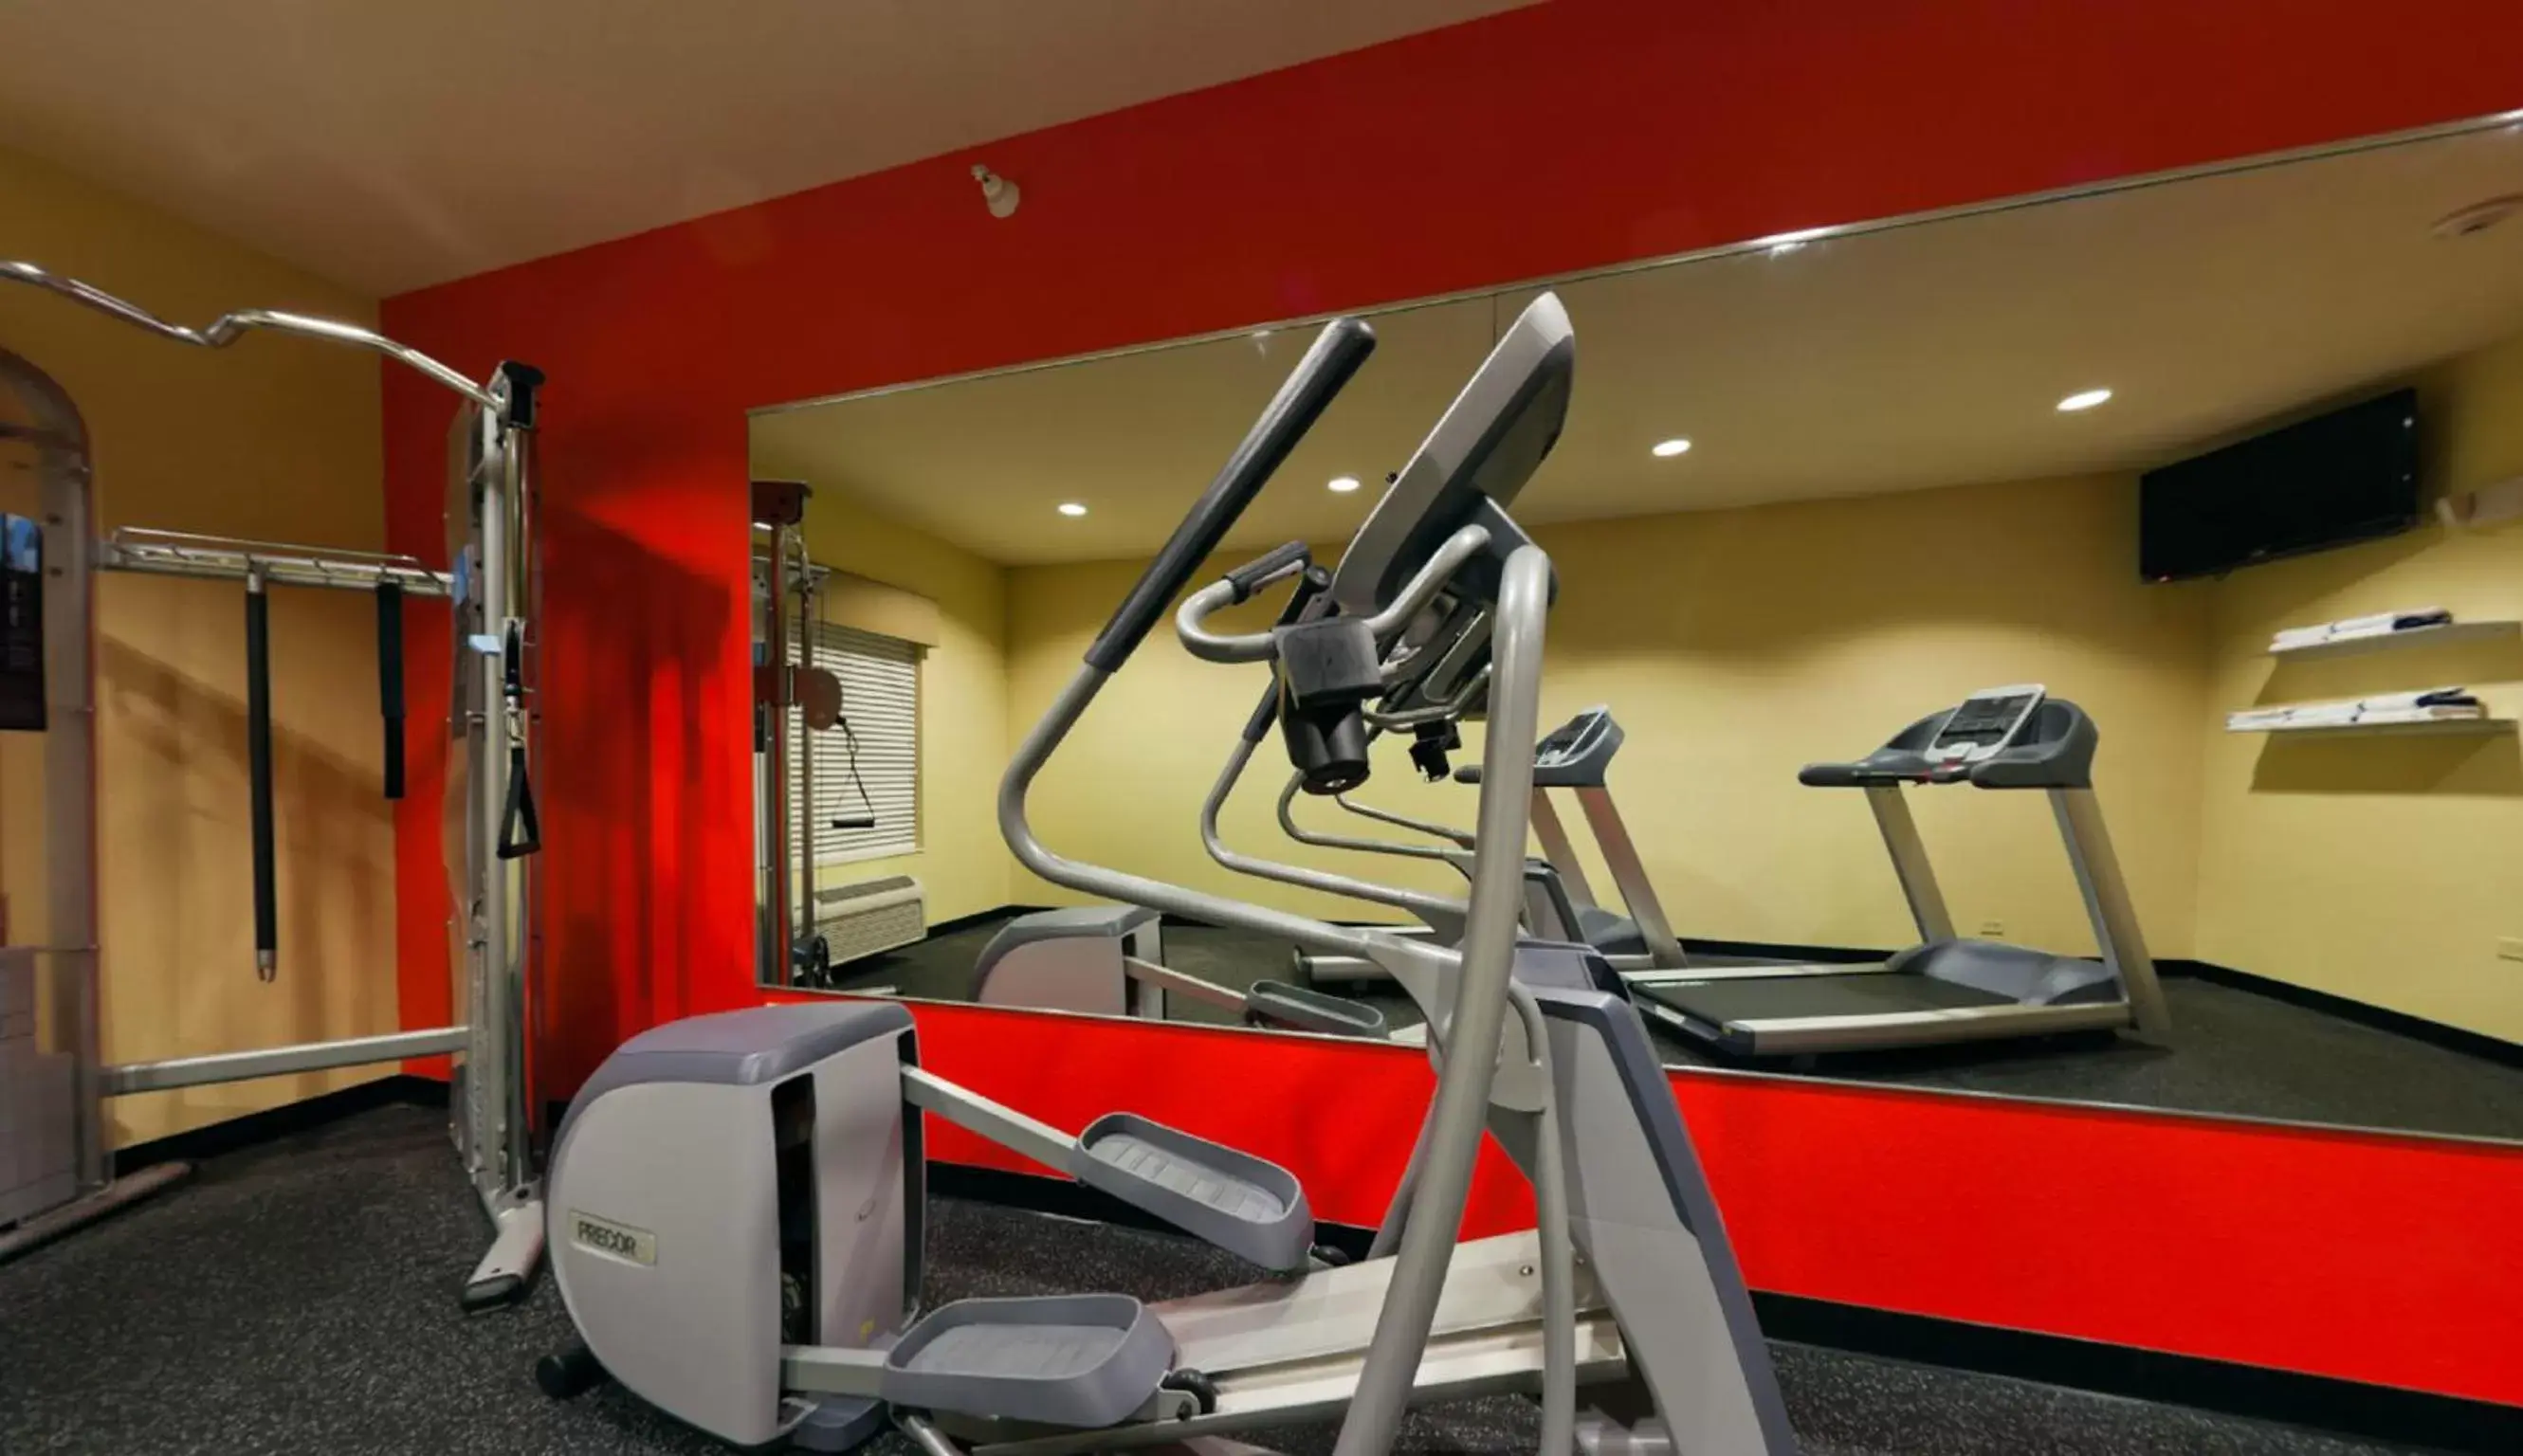 Fitness centre/facilities, Fitness Center/Facilities in Country Inn & Suites by Radisson, Michigan City, IN